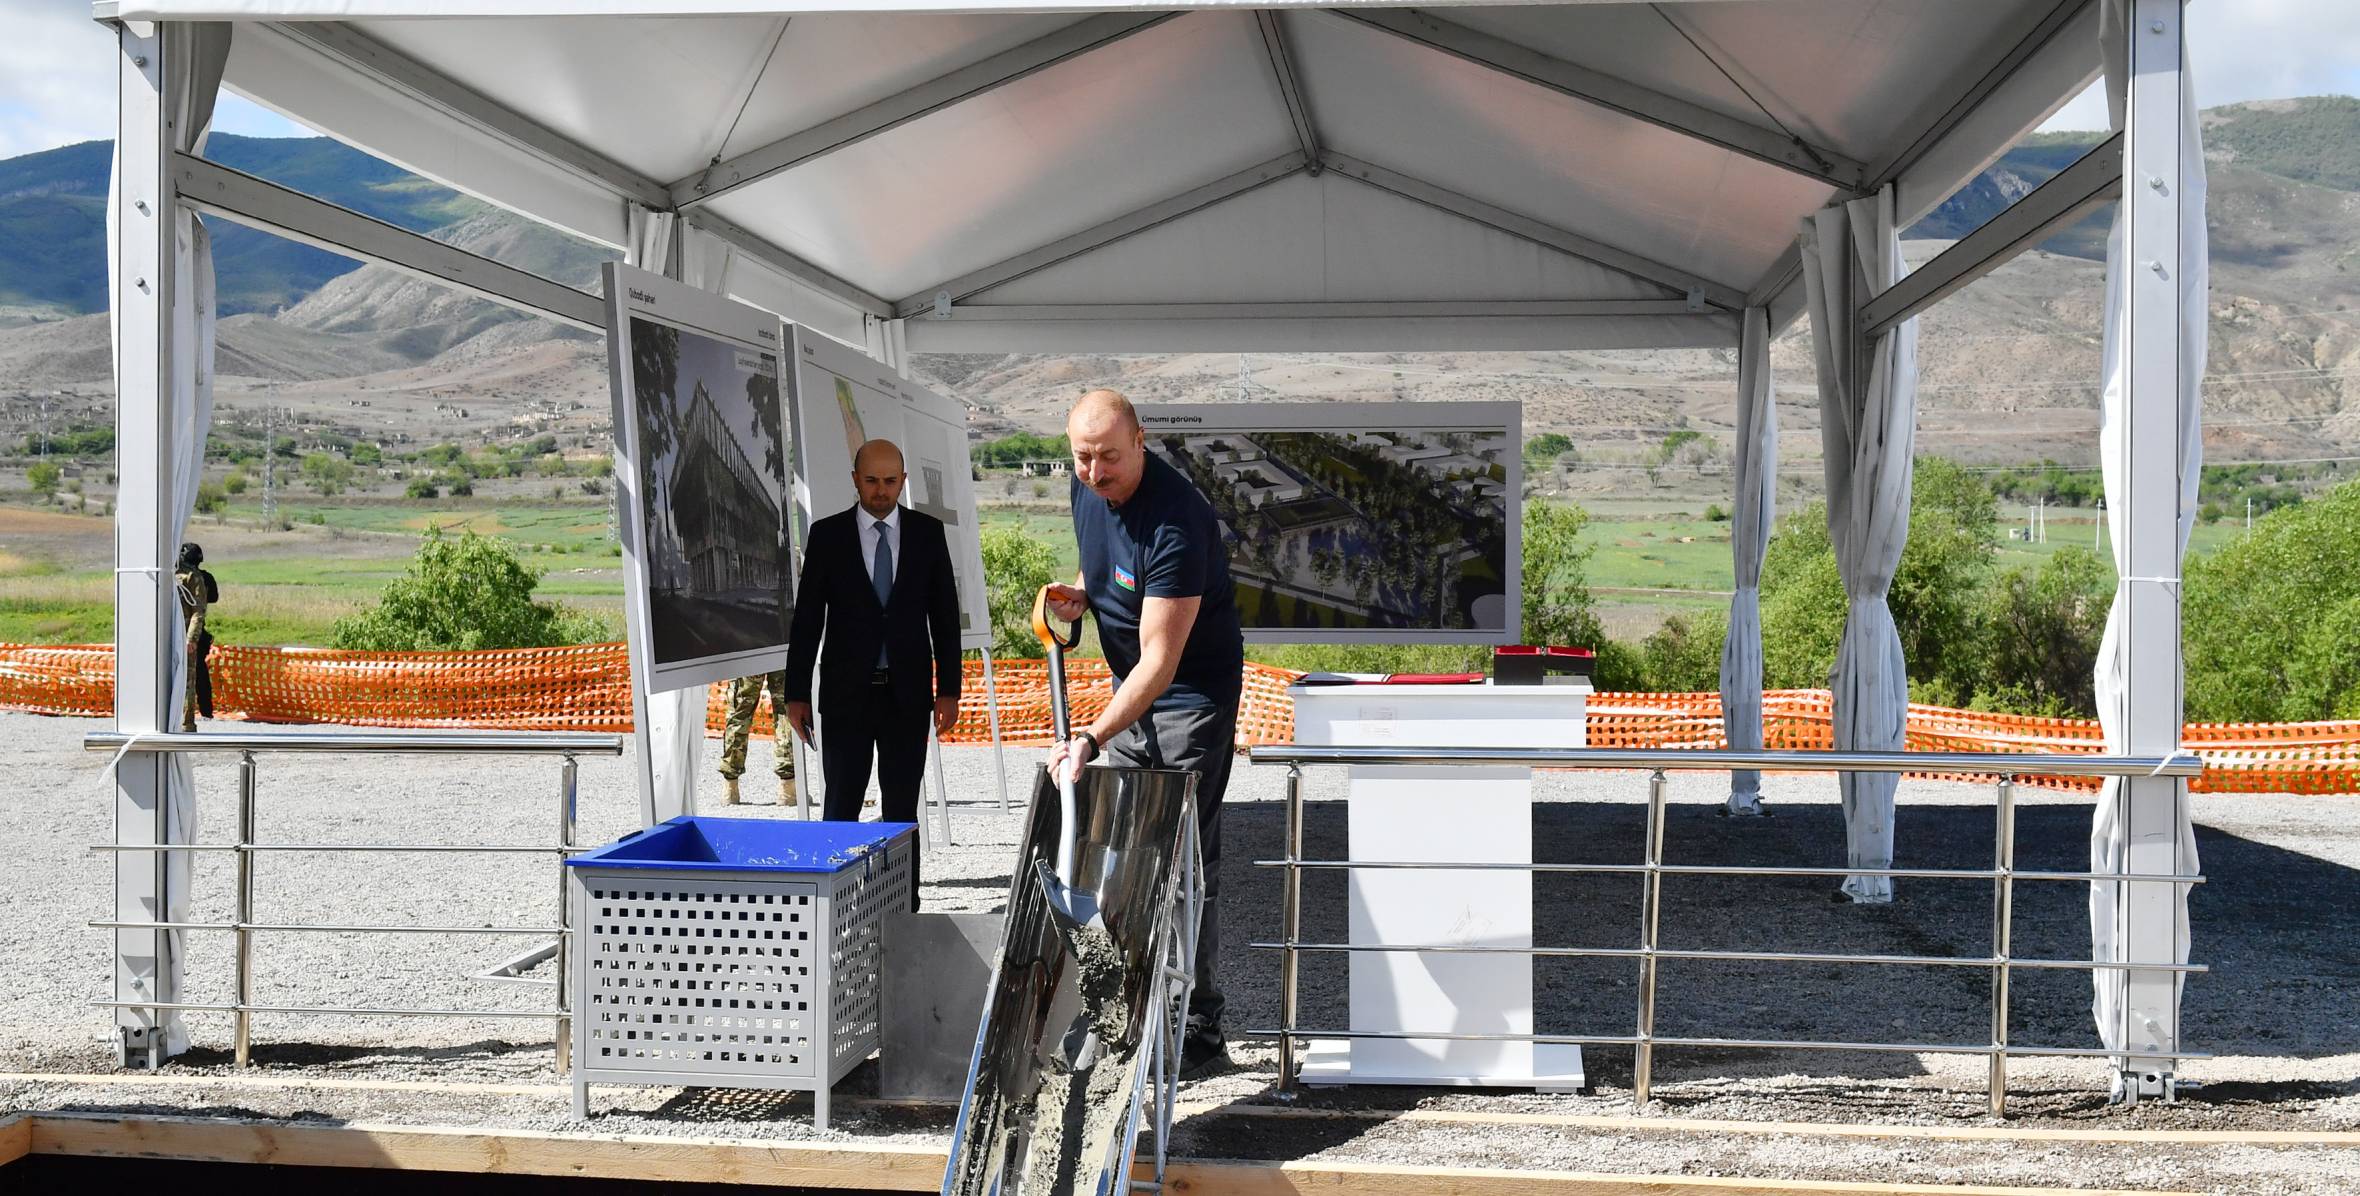 Ilham Aliyev attended groundbreaking ceremony for administrative building in city of Gubadli